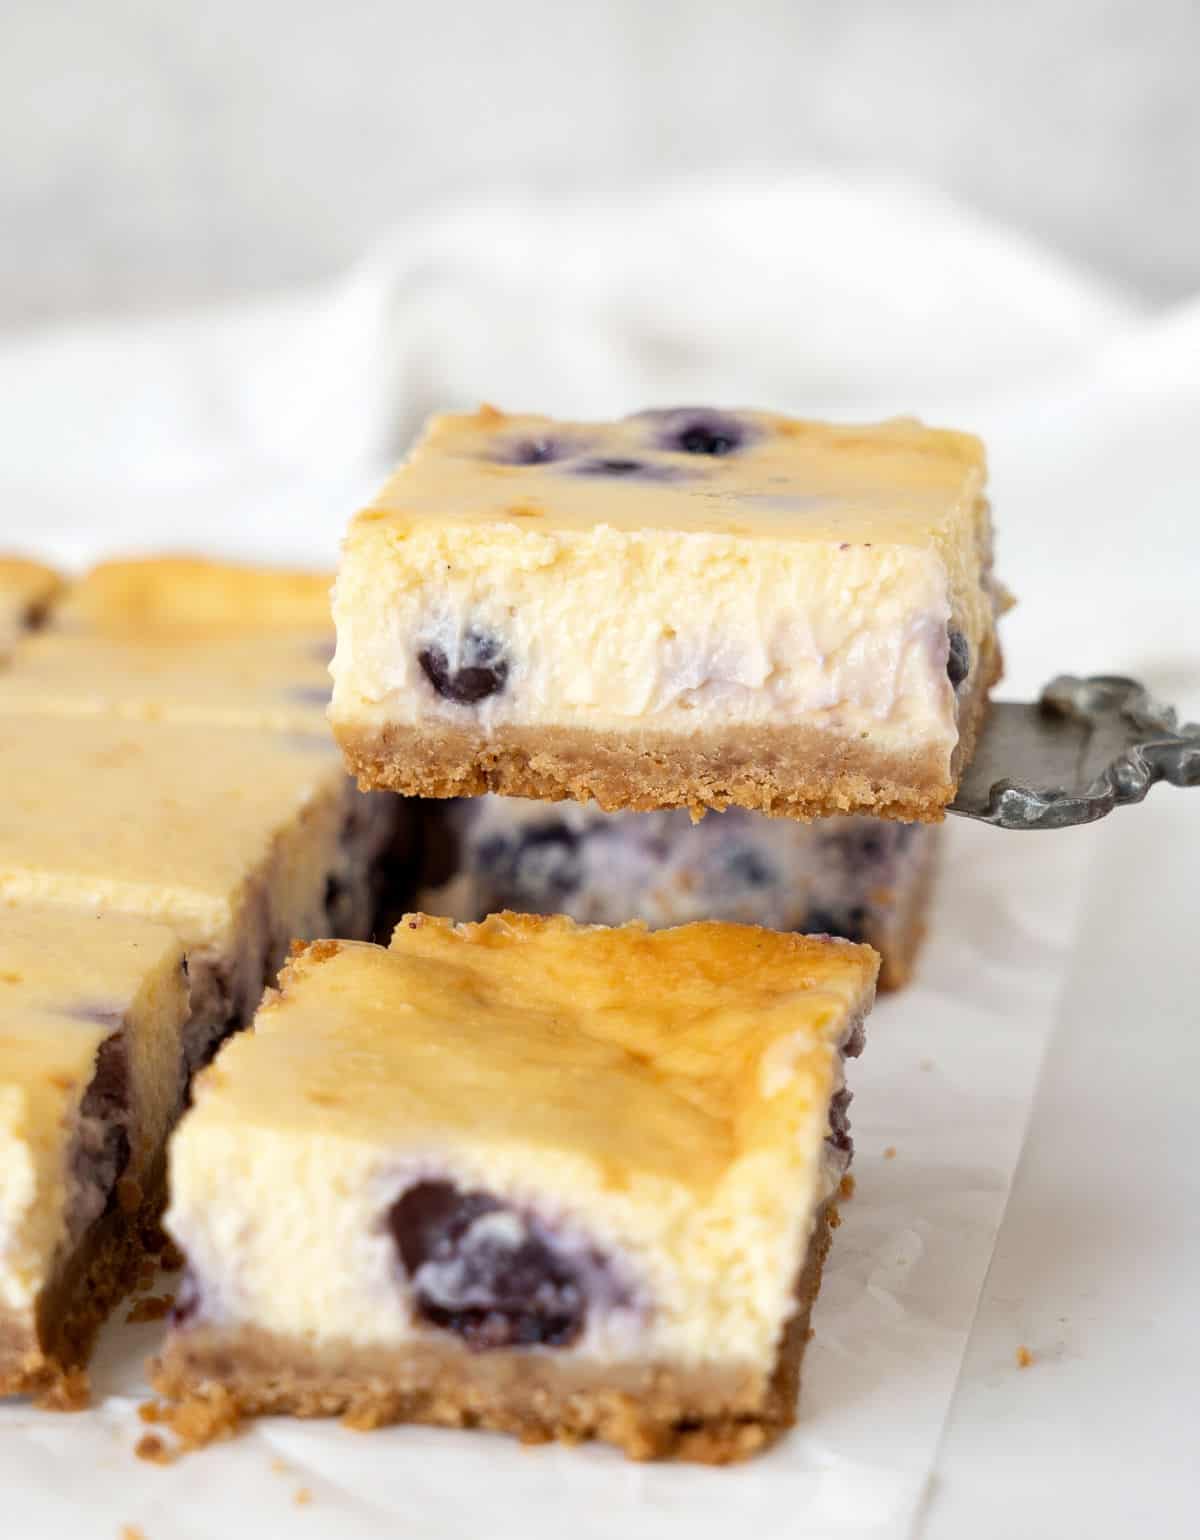 Squares of blueberry cheesecake on a white paper, one is being lifted. White background.